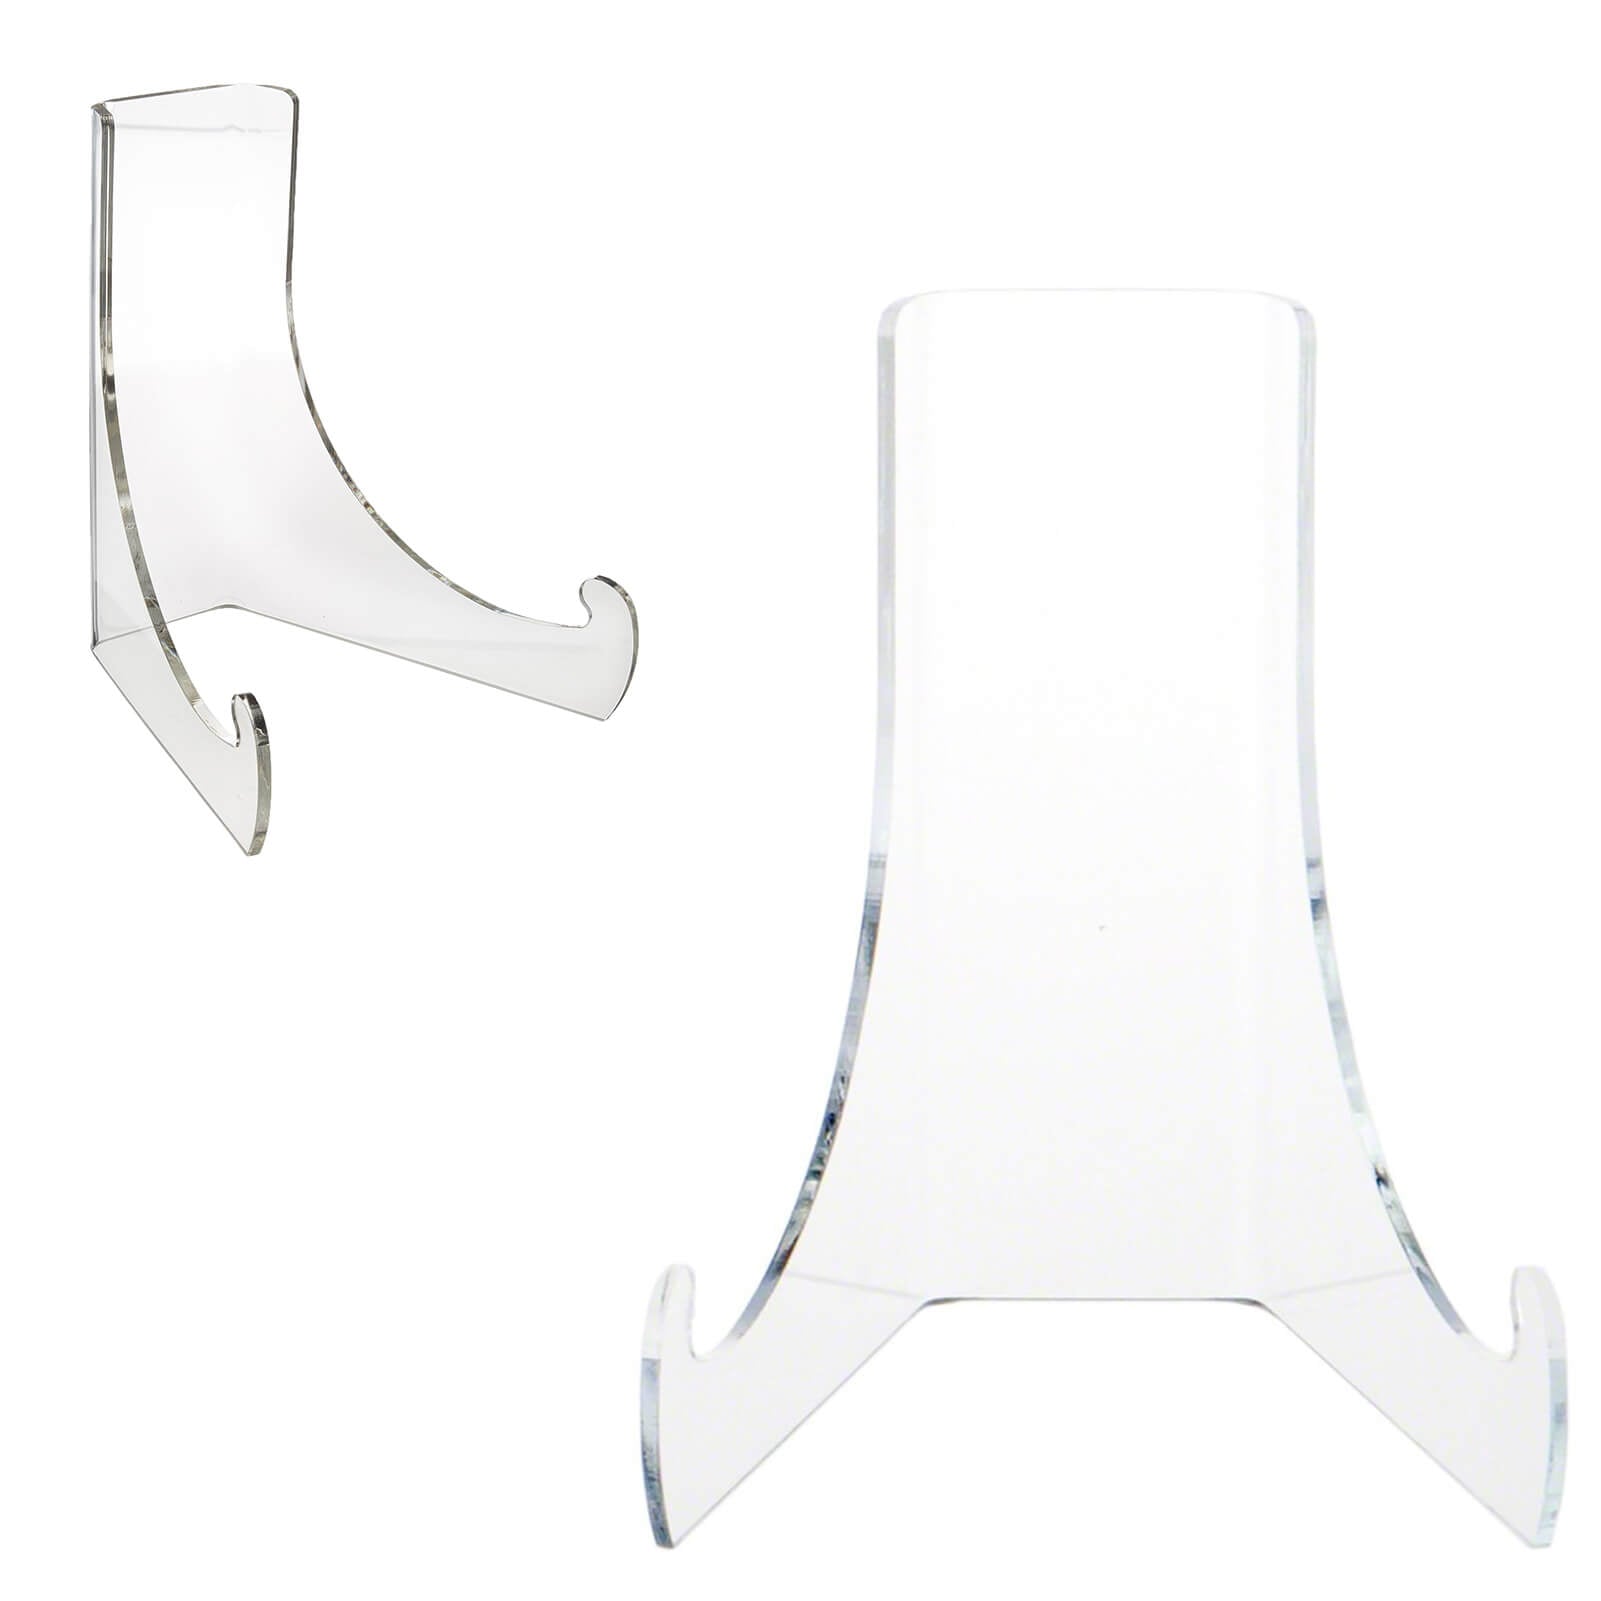  Boloyo 60-Degree Angle Acrylic Plate Stand, 3 Inch 2PC